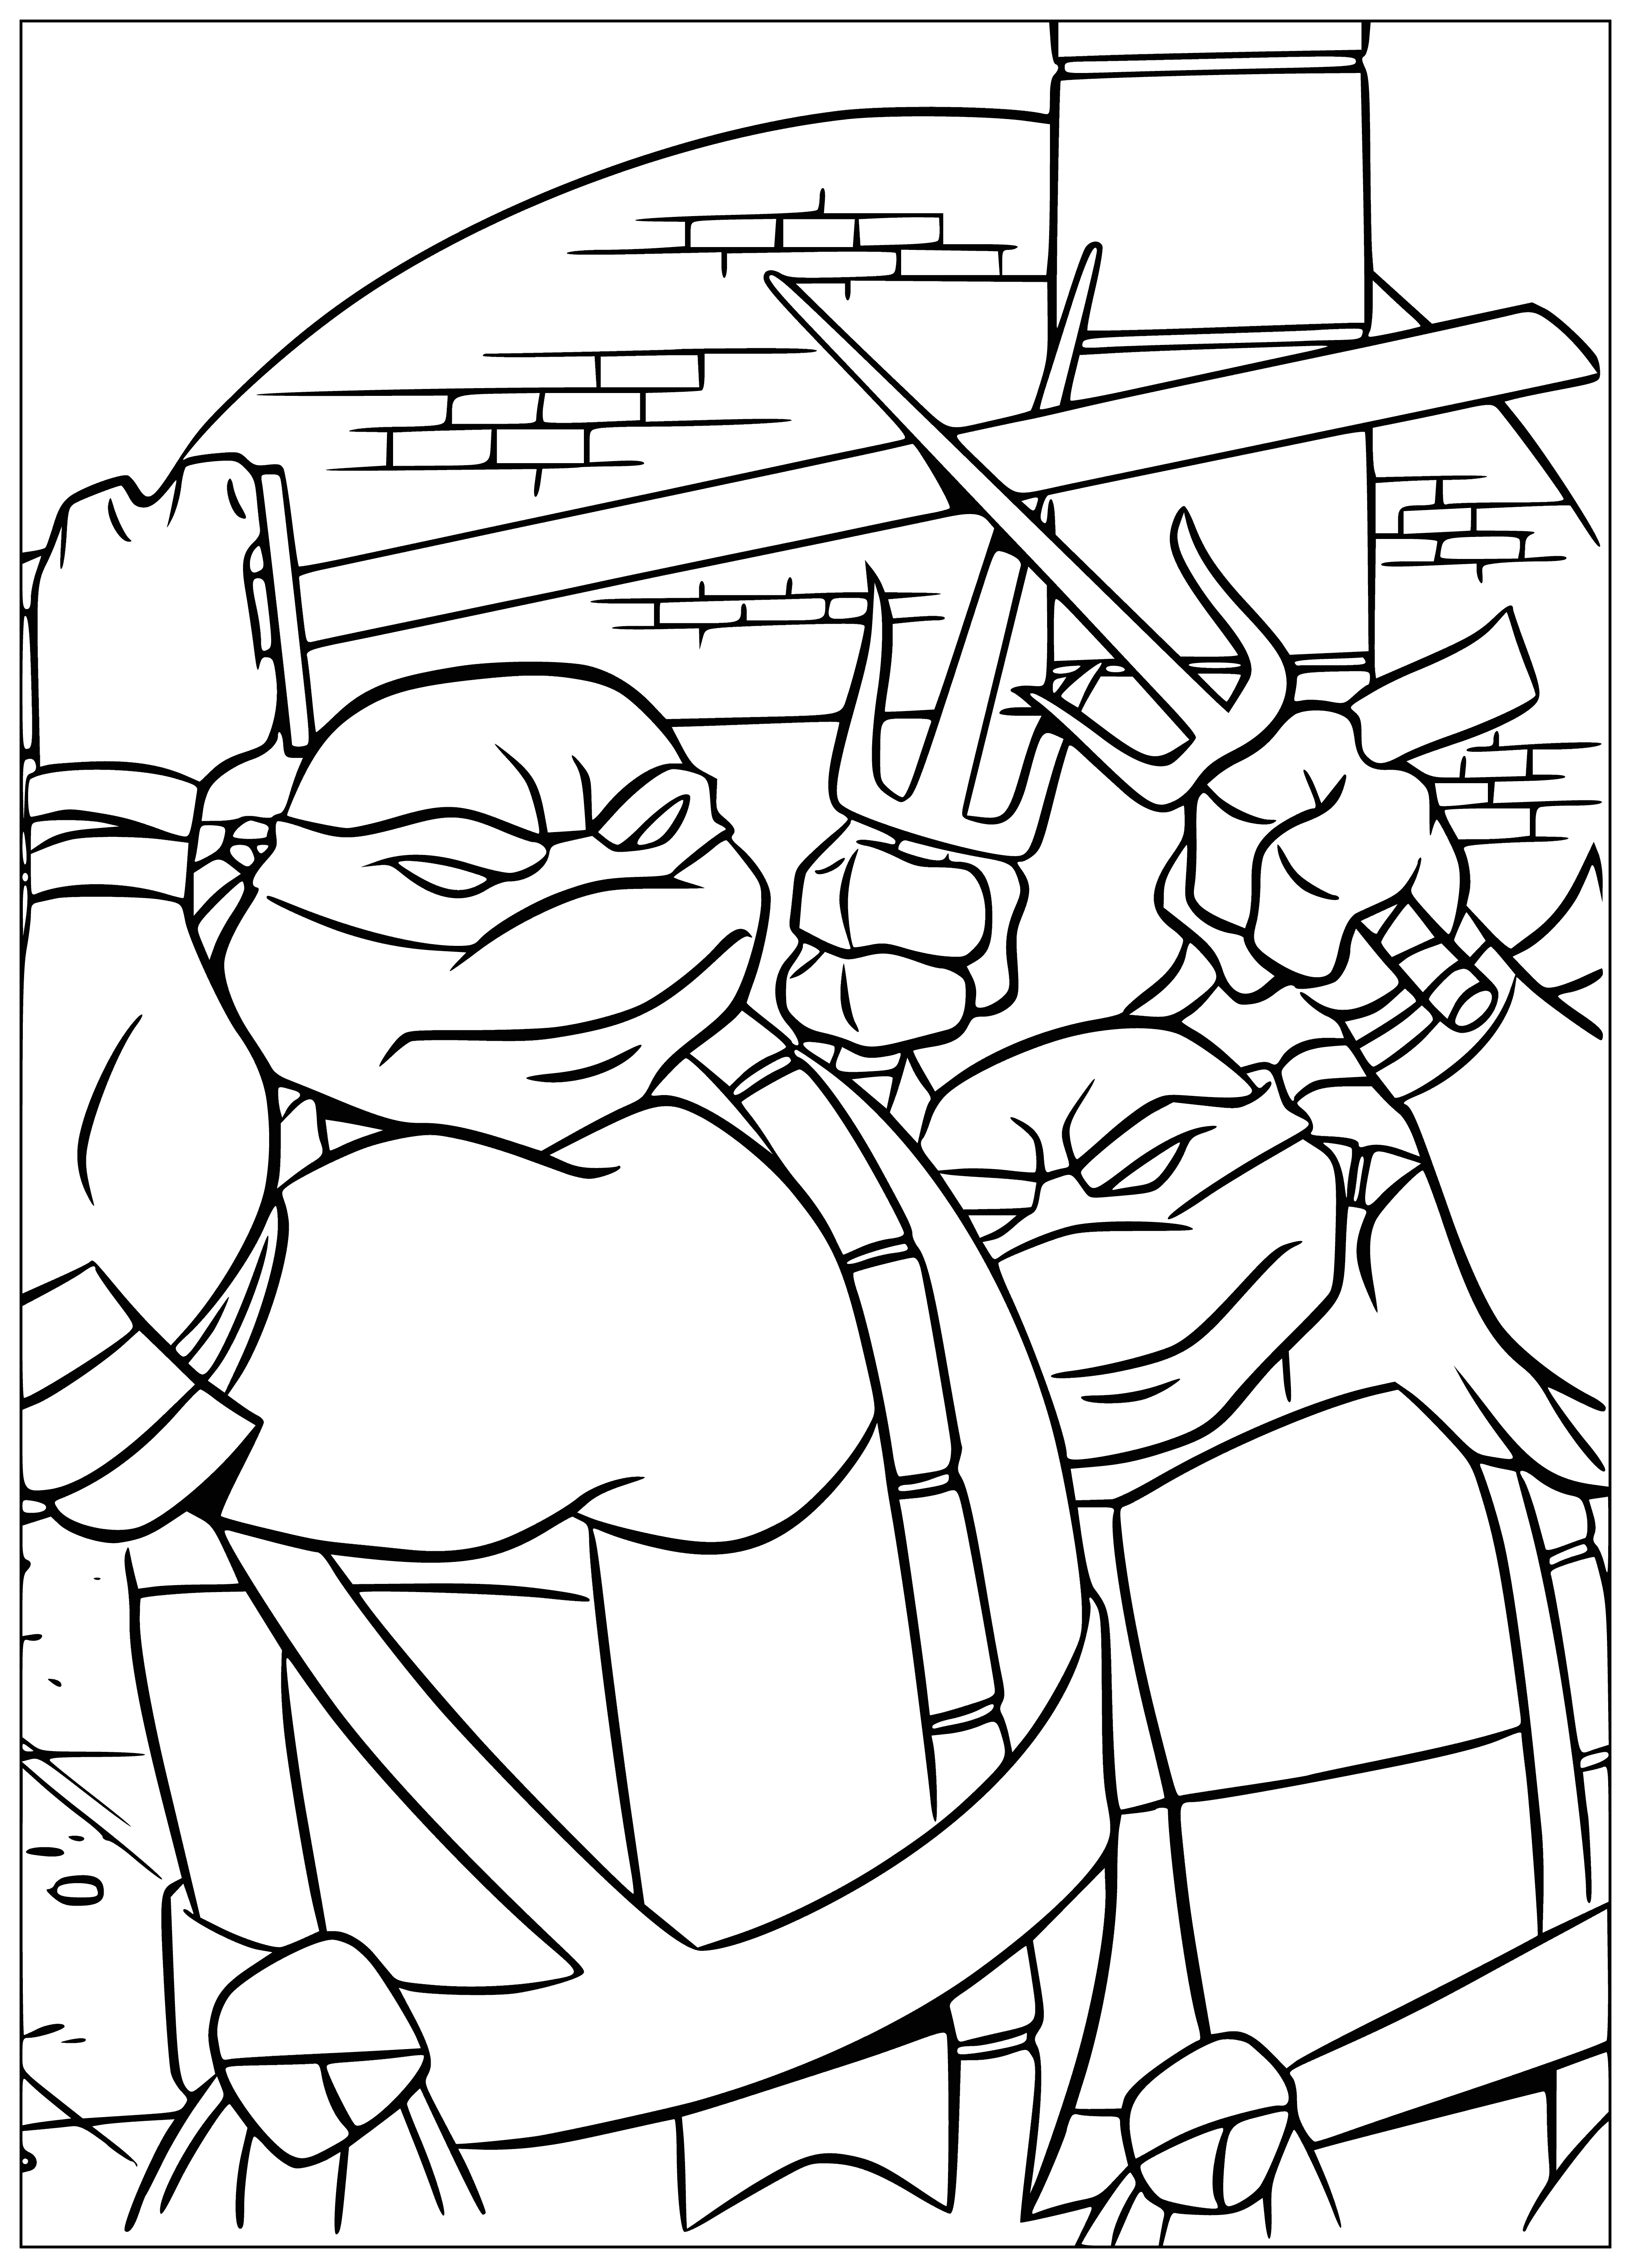 coloring page: Two Ninja Turtles, Raphael (red) & Leonardo (blue). Both have swords, green bodies & full-body outfits, & brown eyes. #TMNT